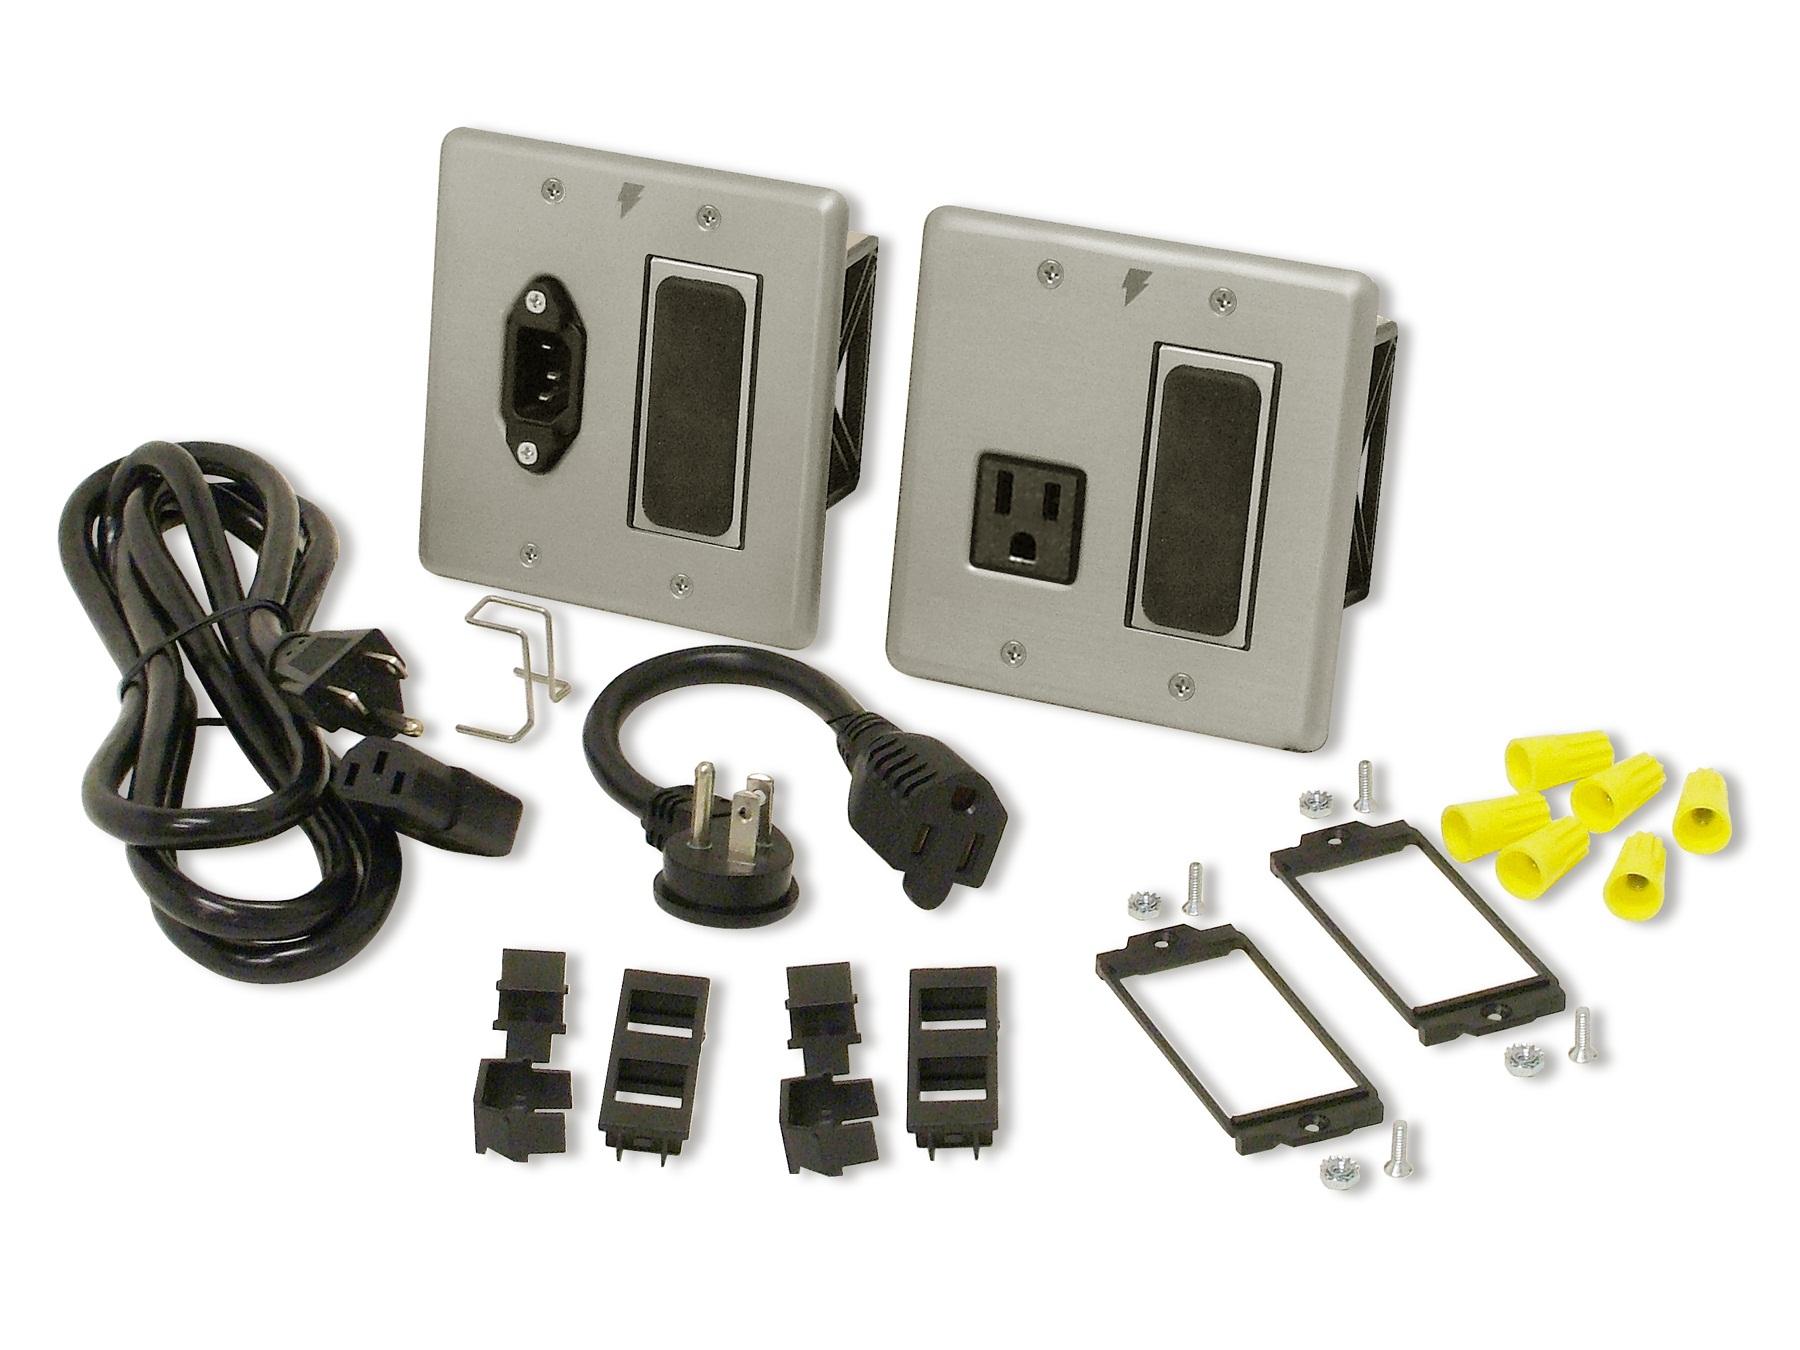 MIW-XT In-Wall Power Extender System by Panamax